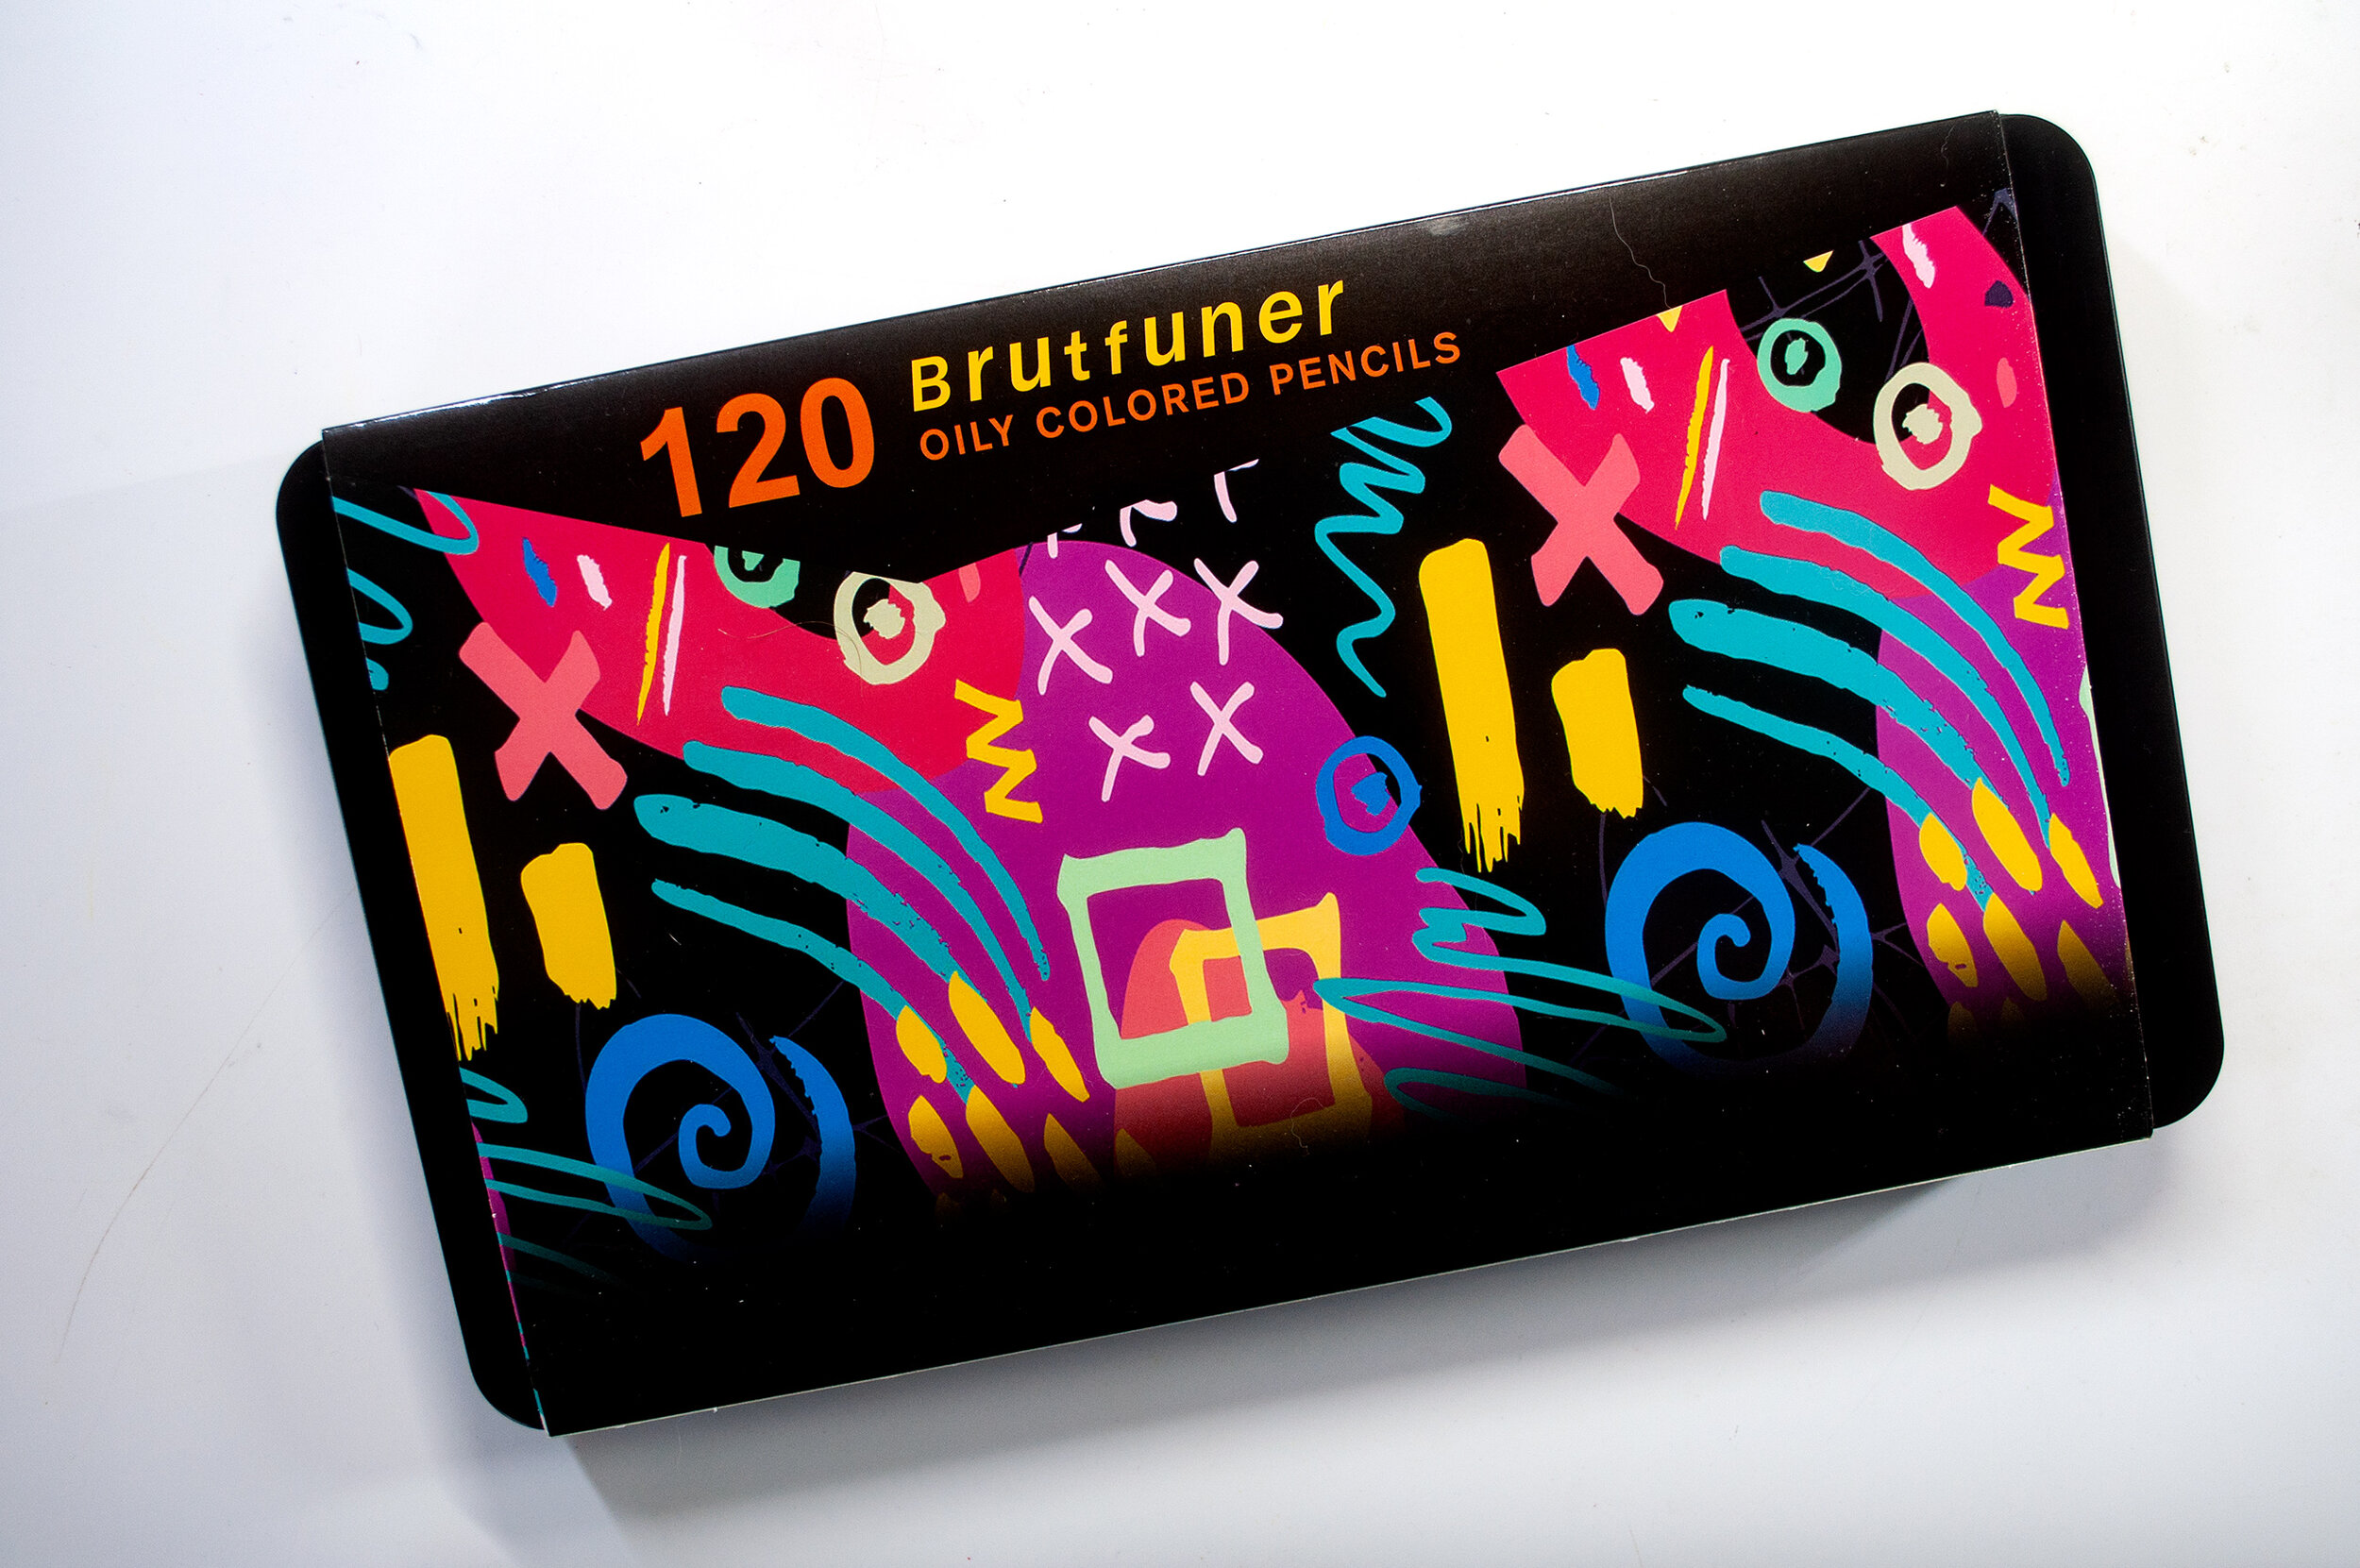 Brutfuner 120 Square Colored Pencil Review - Are These Cheap Oily Pencils  Worth Your Money? 